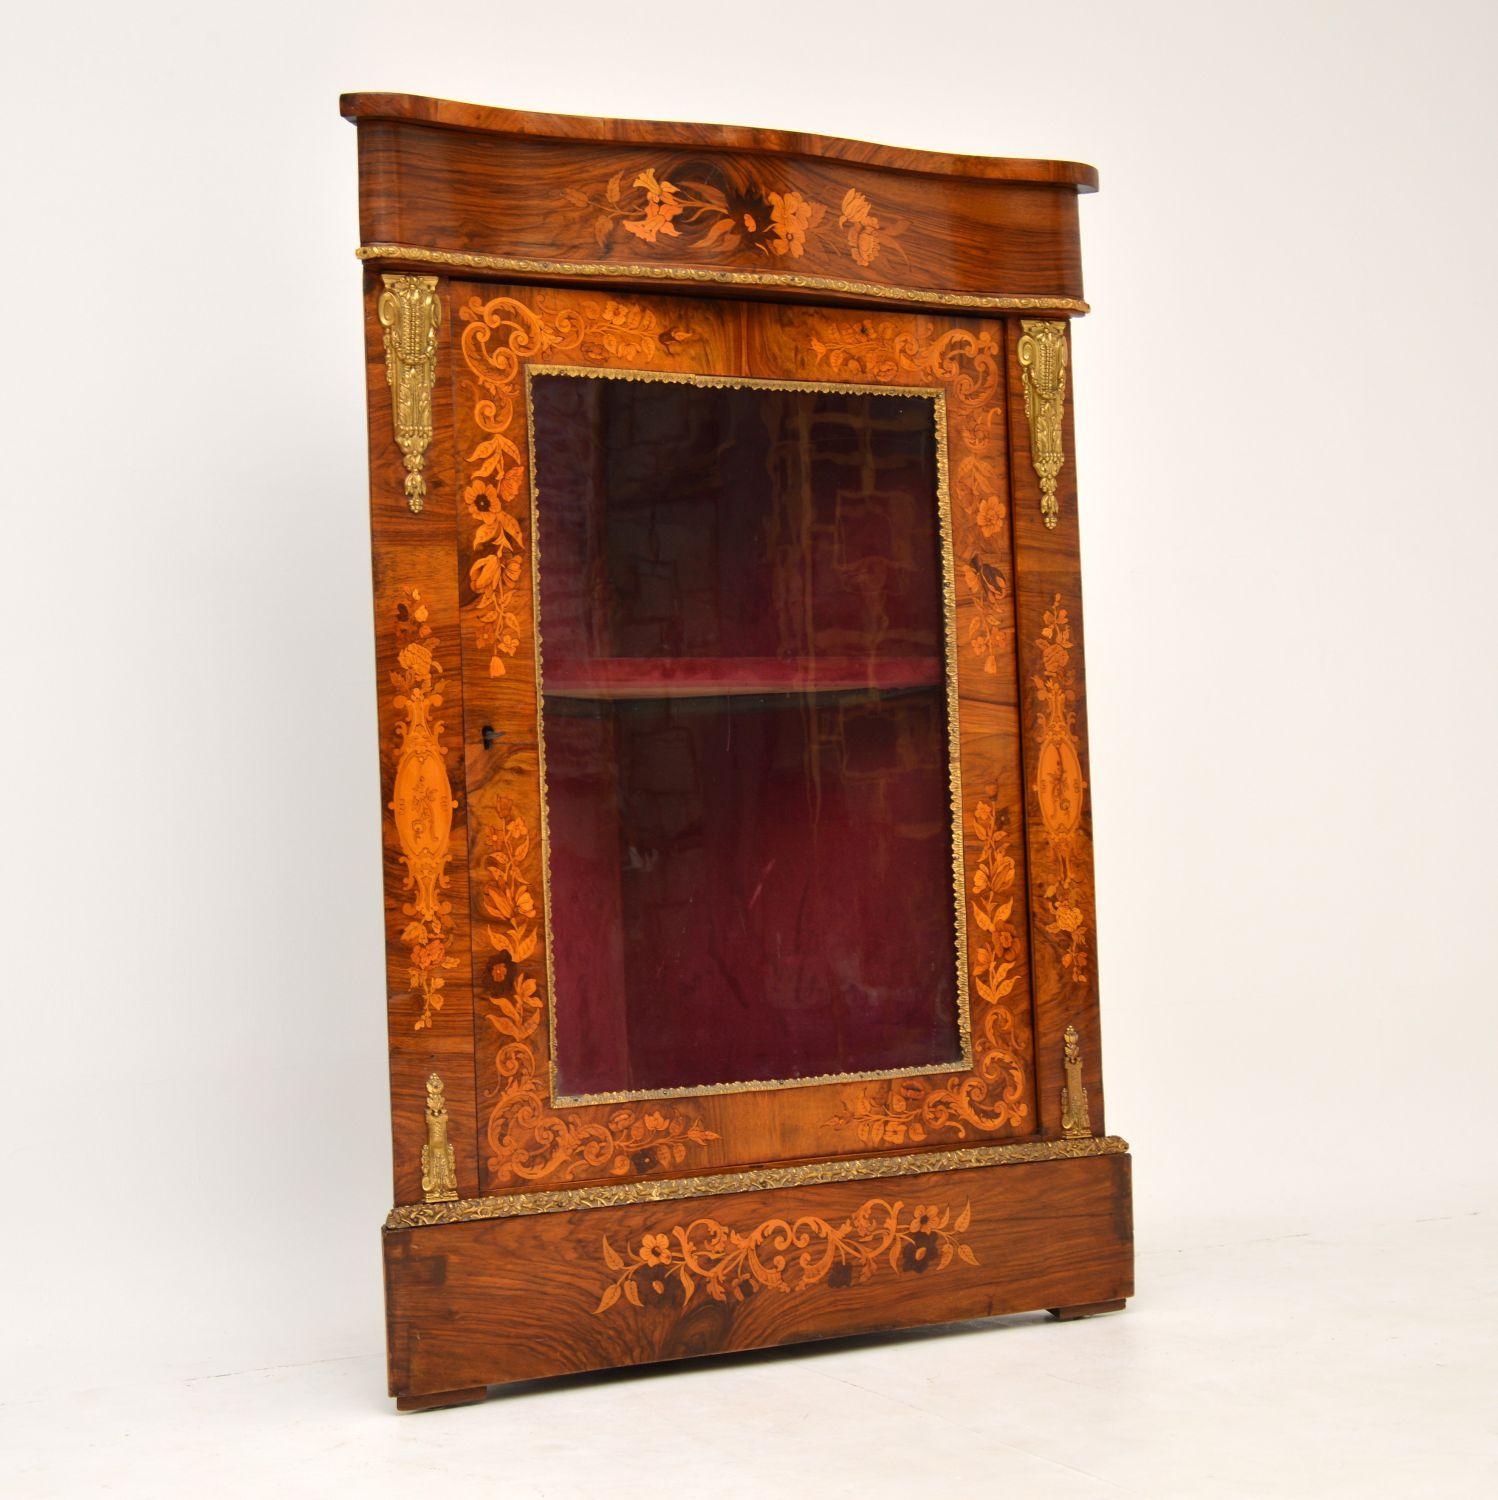 Antique Victorian figured walnut corner cabinet with wonderfully detailed floral marquetry all-over & other inlays. It has a serpentine shaped top & gilt bronze mounts on the top & bottom of the sides. There are also gilt metal trimmings, top &